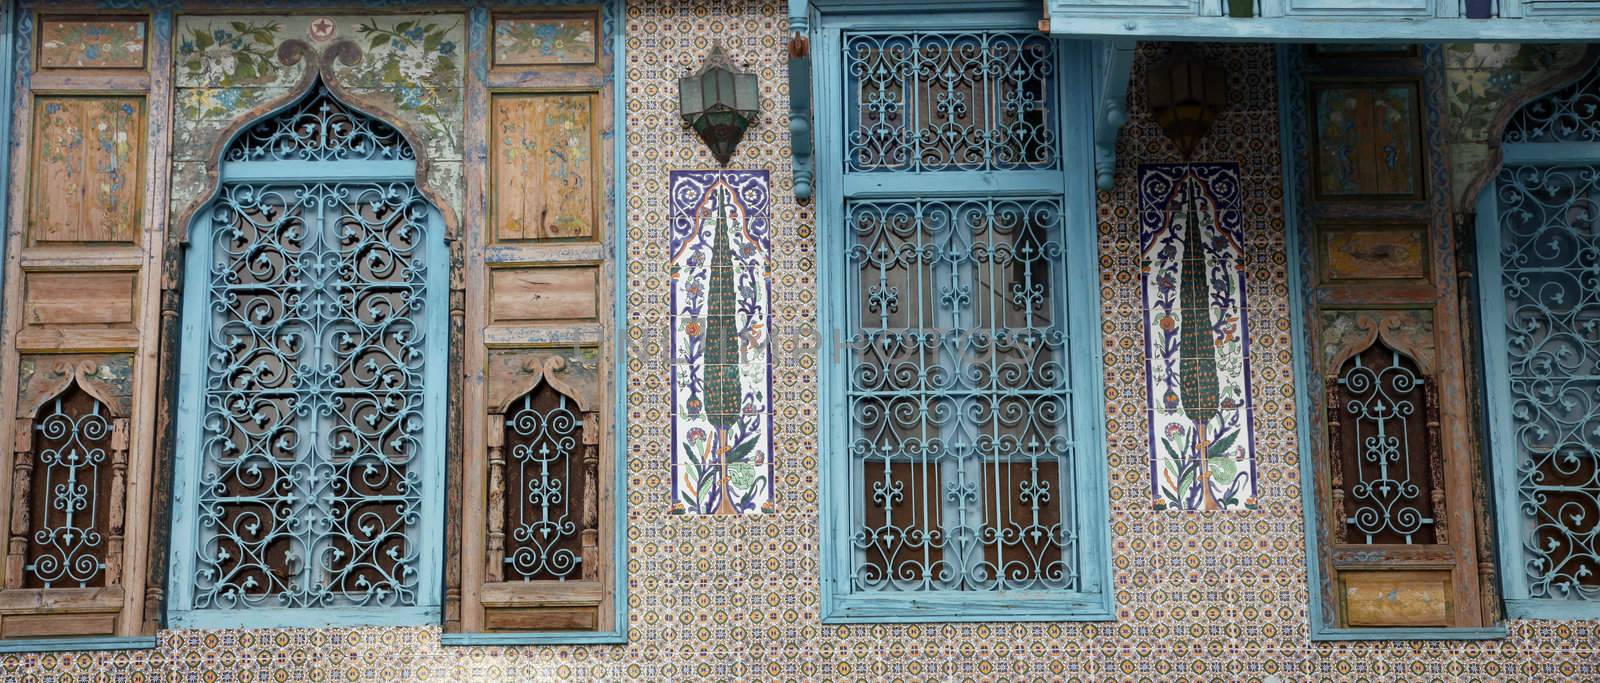 Old Tunisian window with classical Arab ornaments by atlas